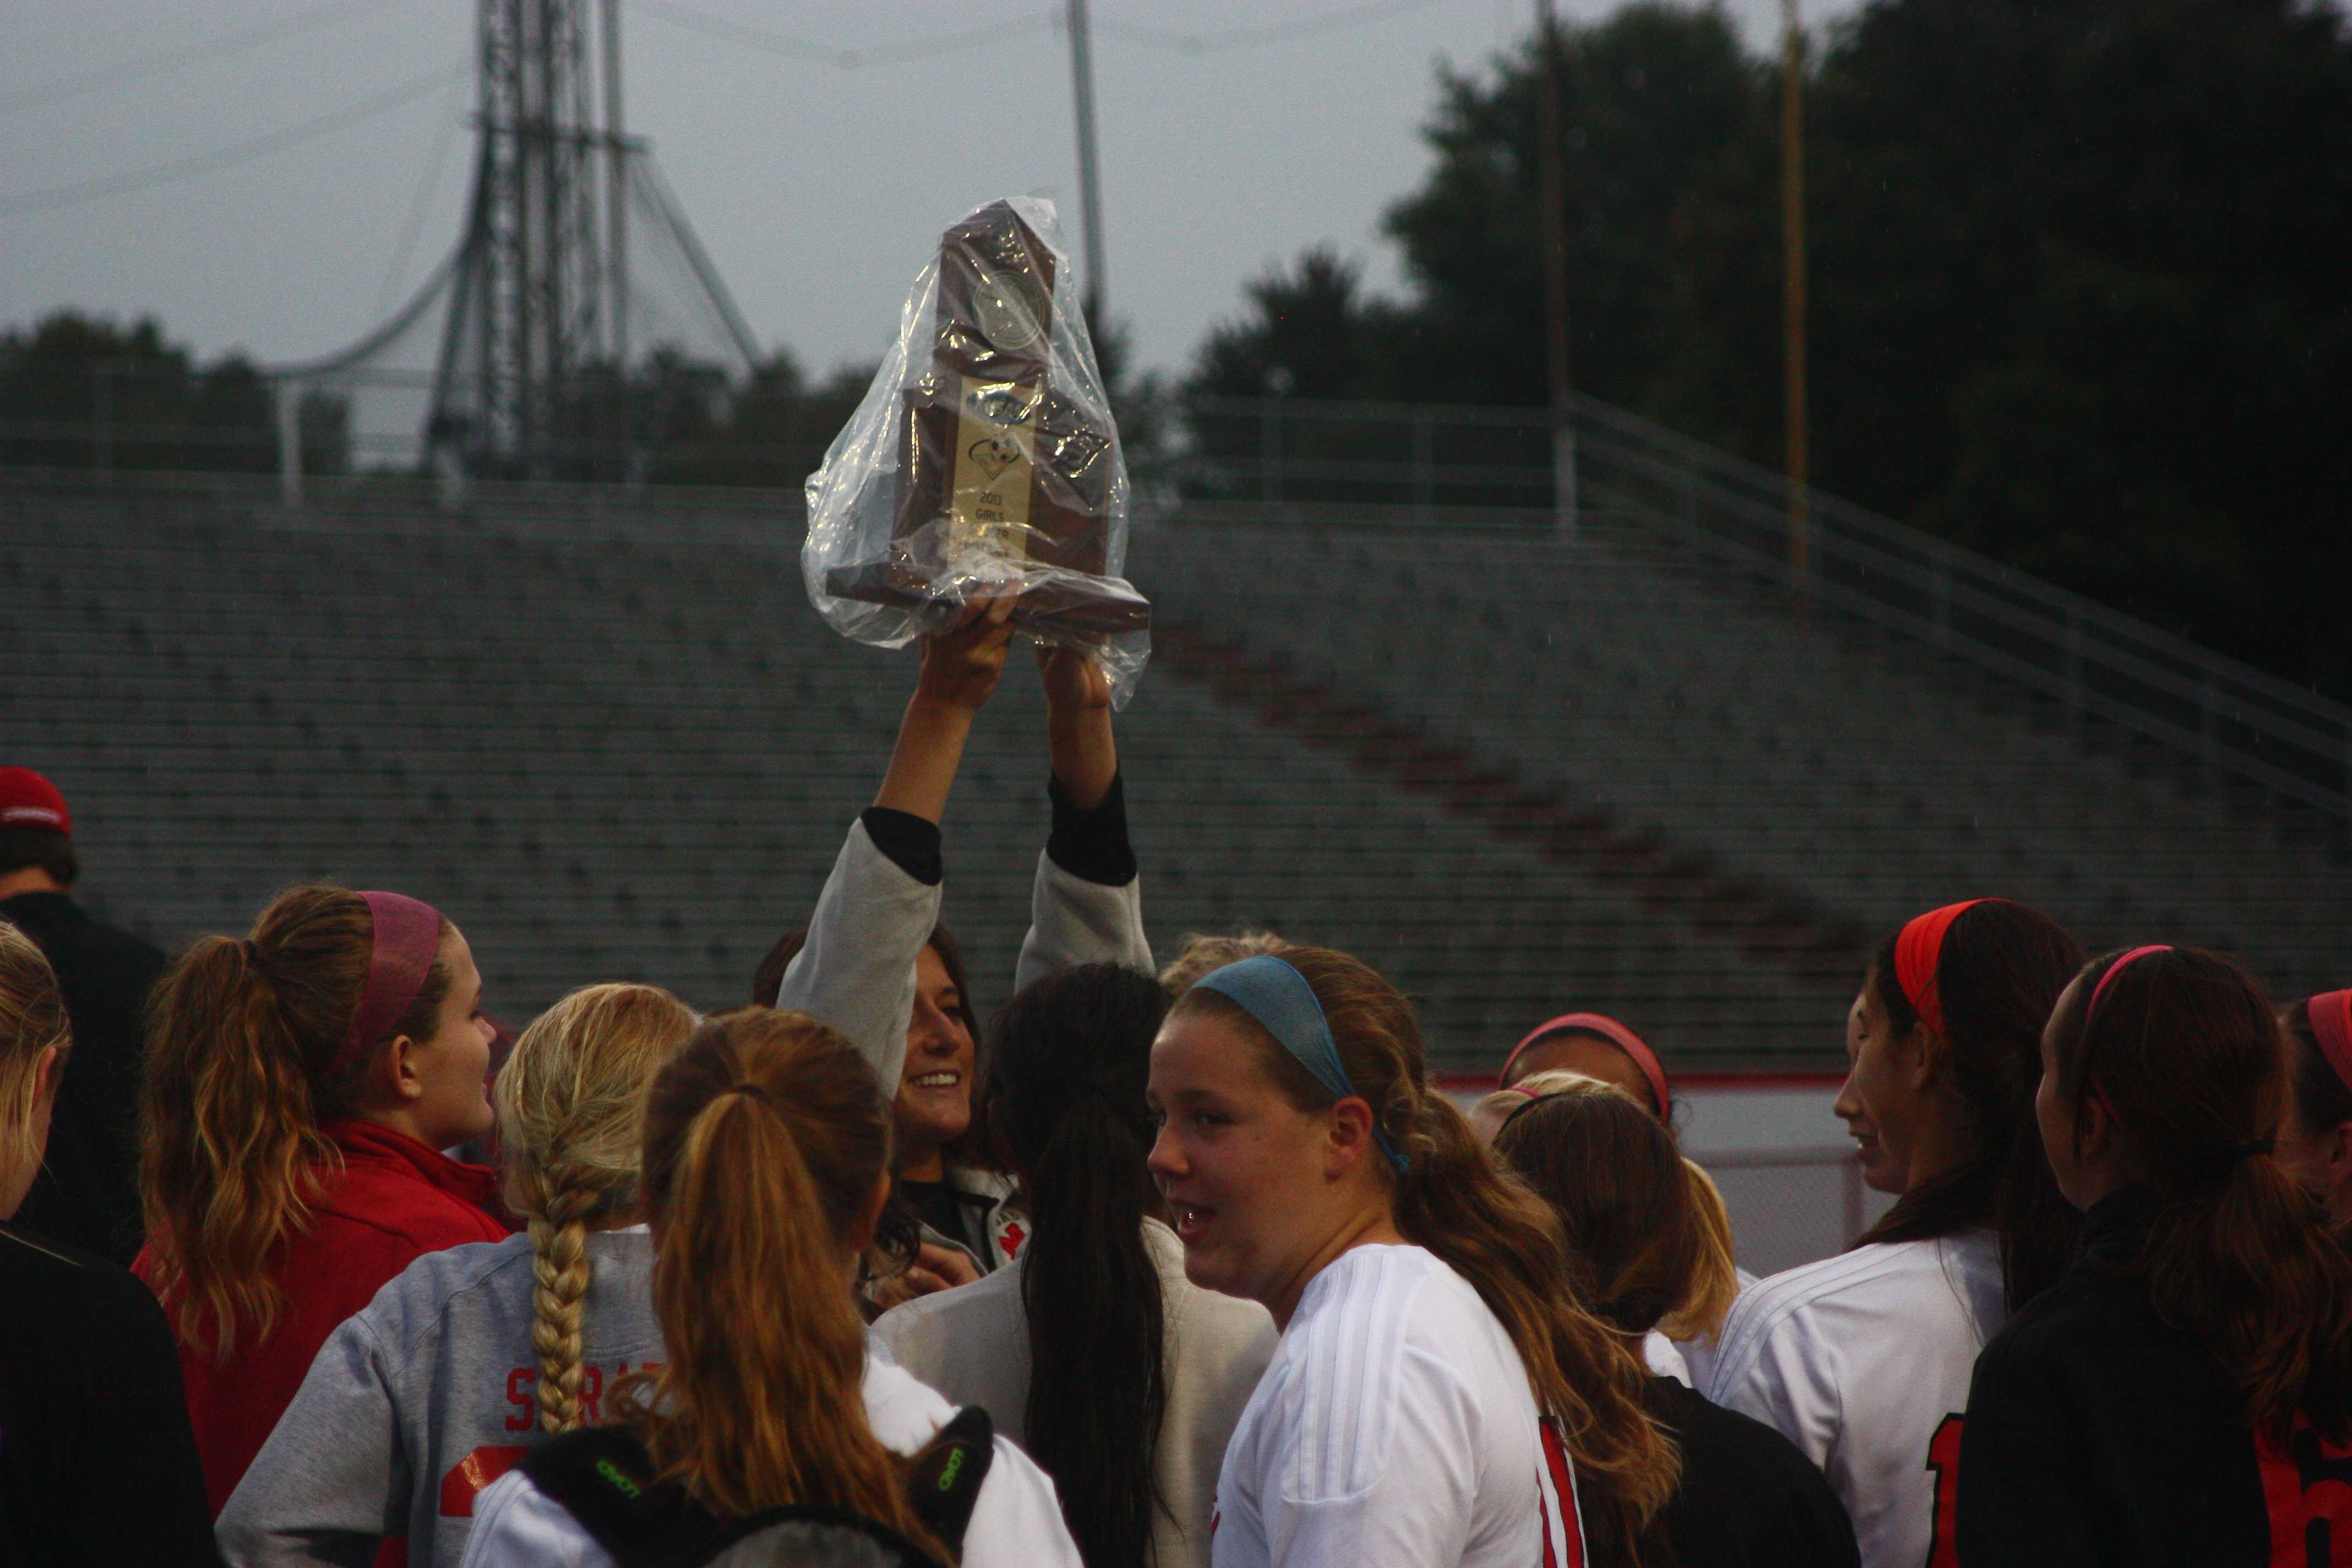 Emily Wilbar hoists the district champion trphy above her team in celebration of their victory over Presentation